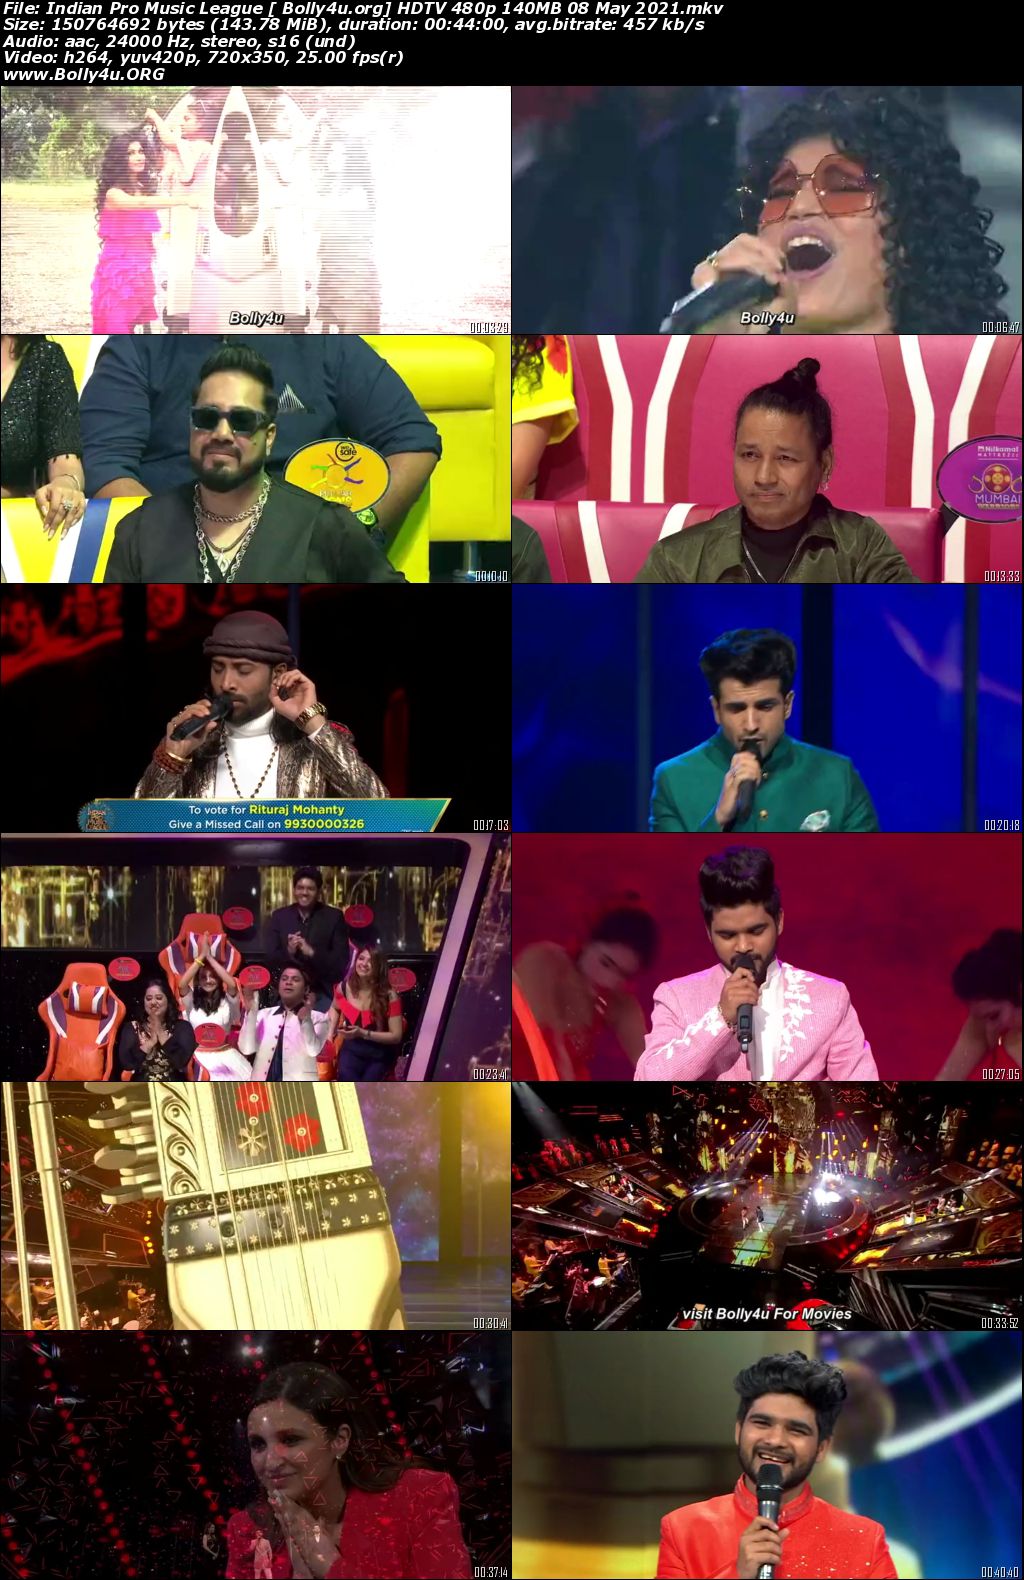 Indian Pro Music League HDTV 480p 140MB 08 May 2021 Download